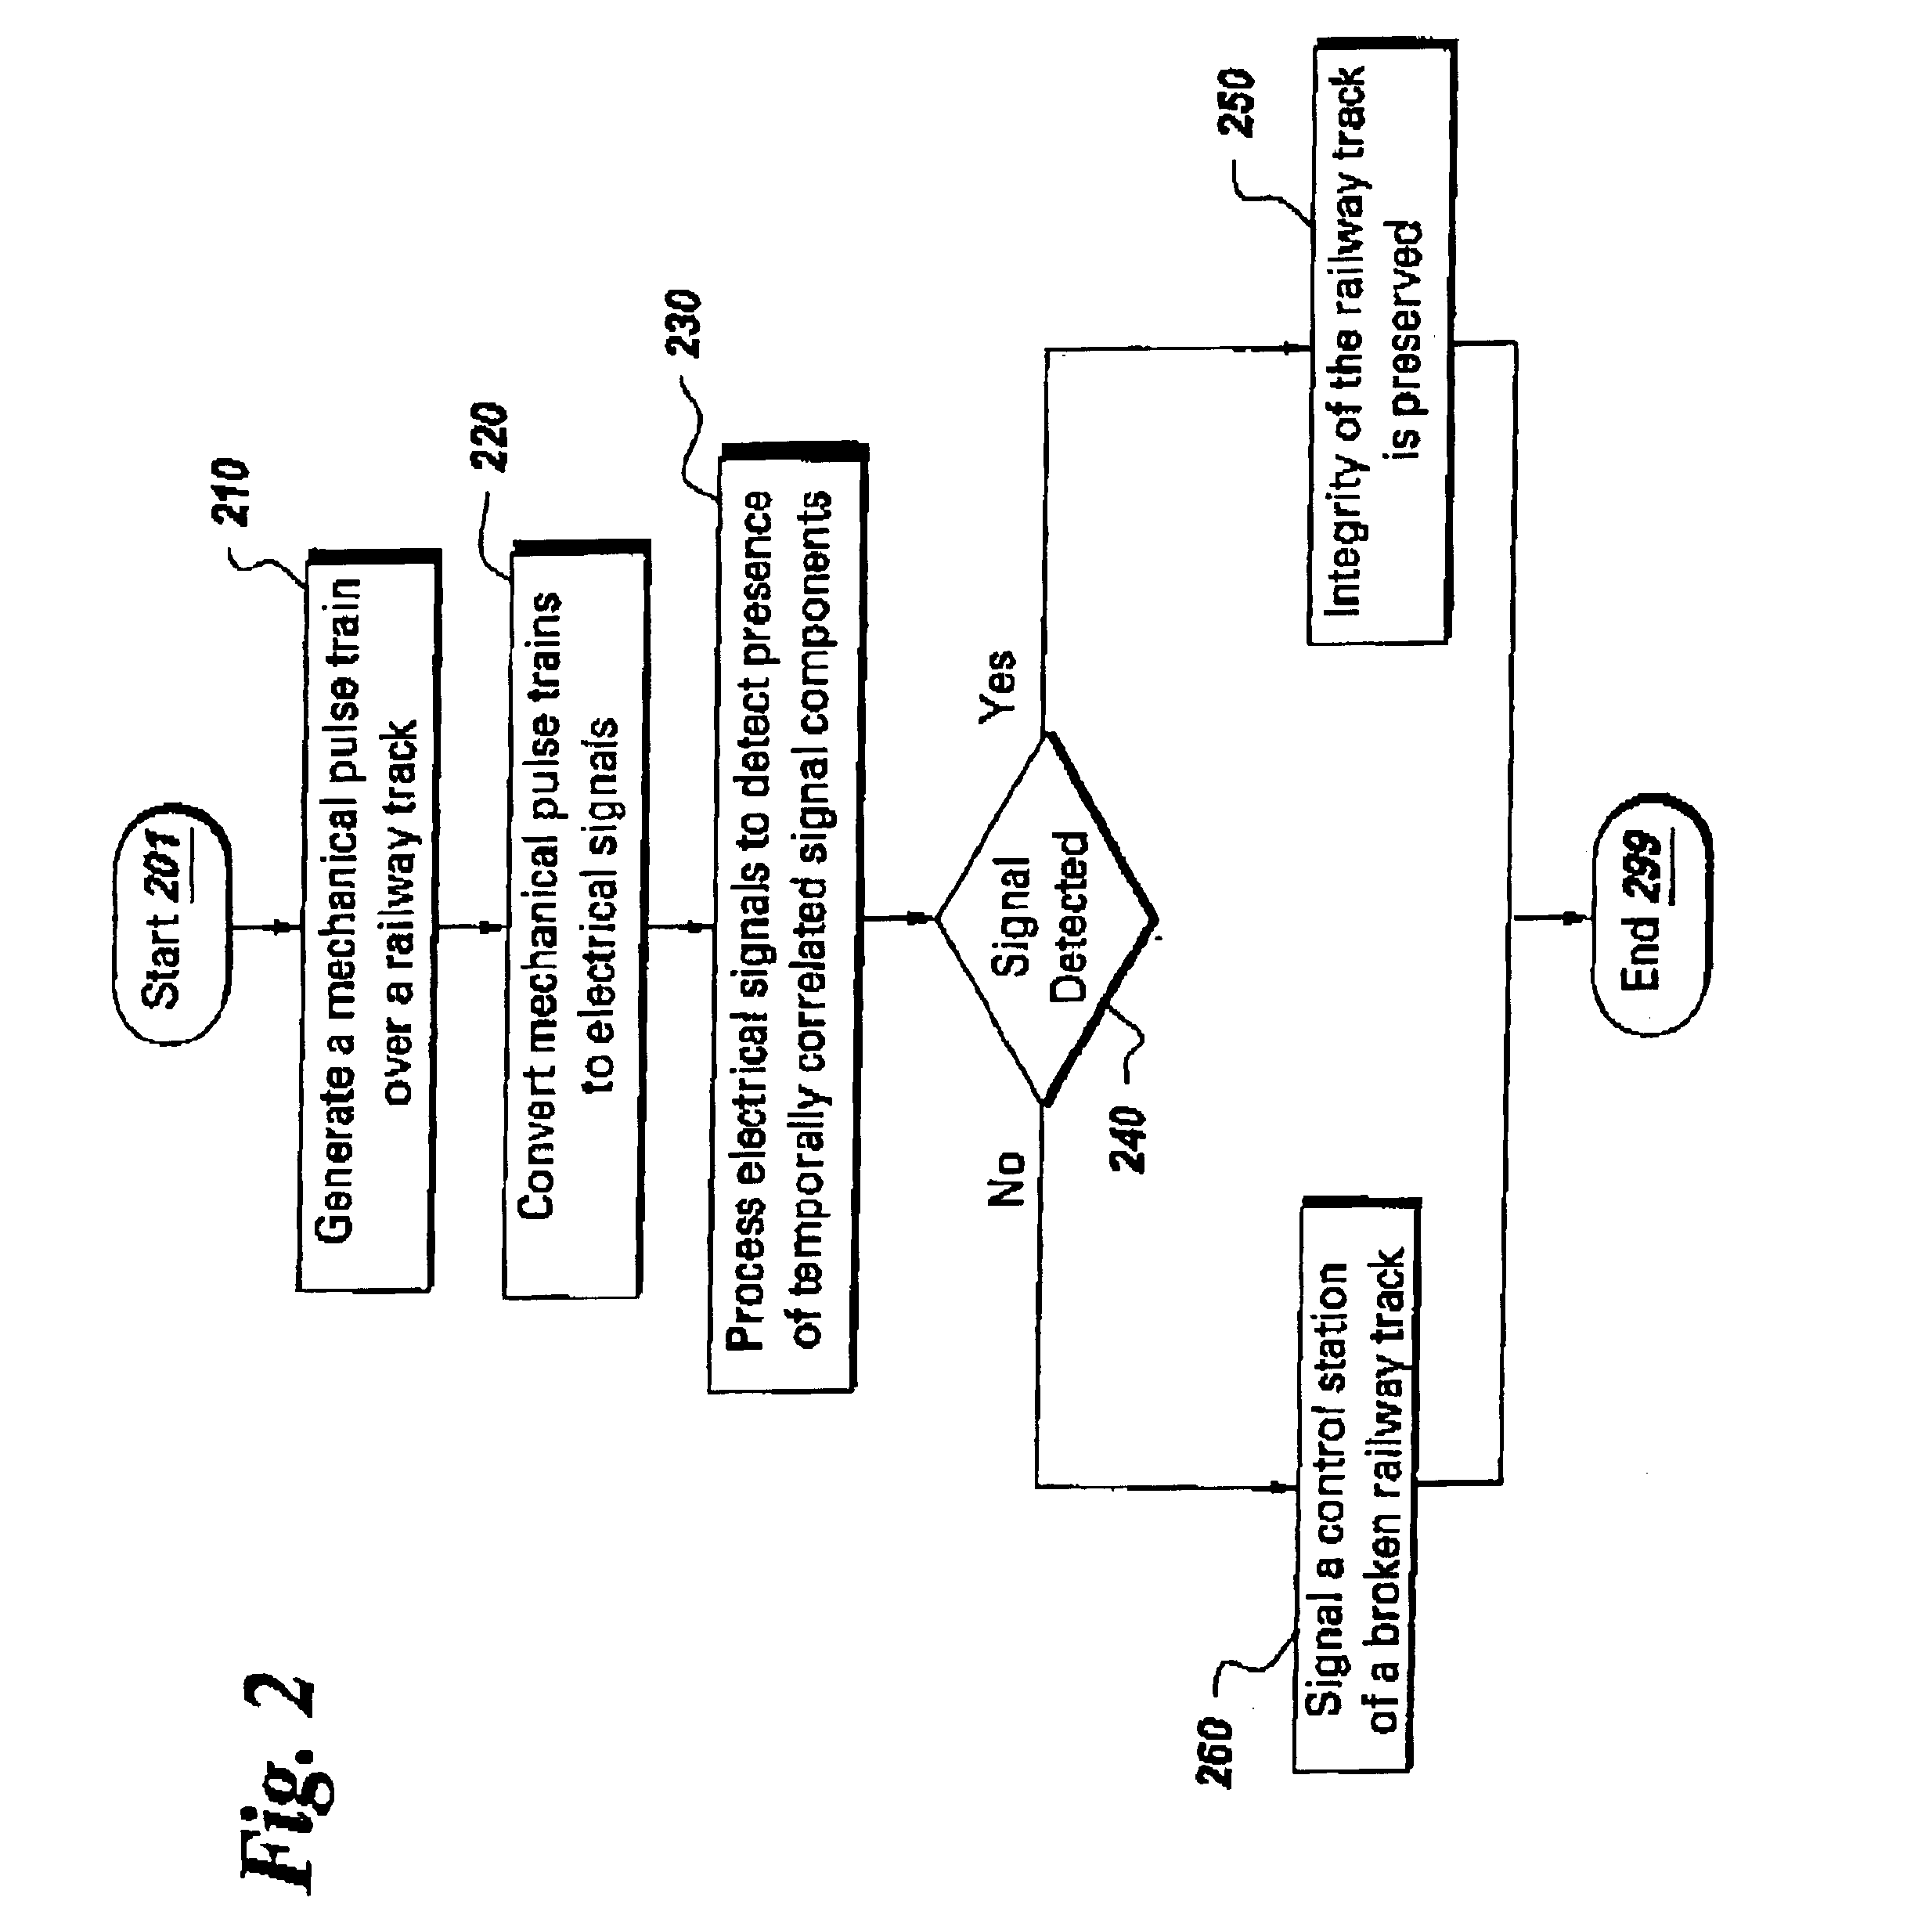 Active broken rail detection system and method